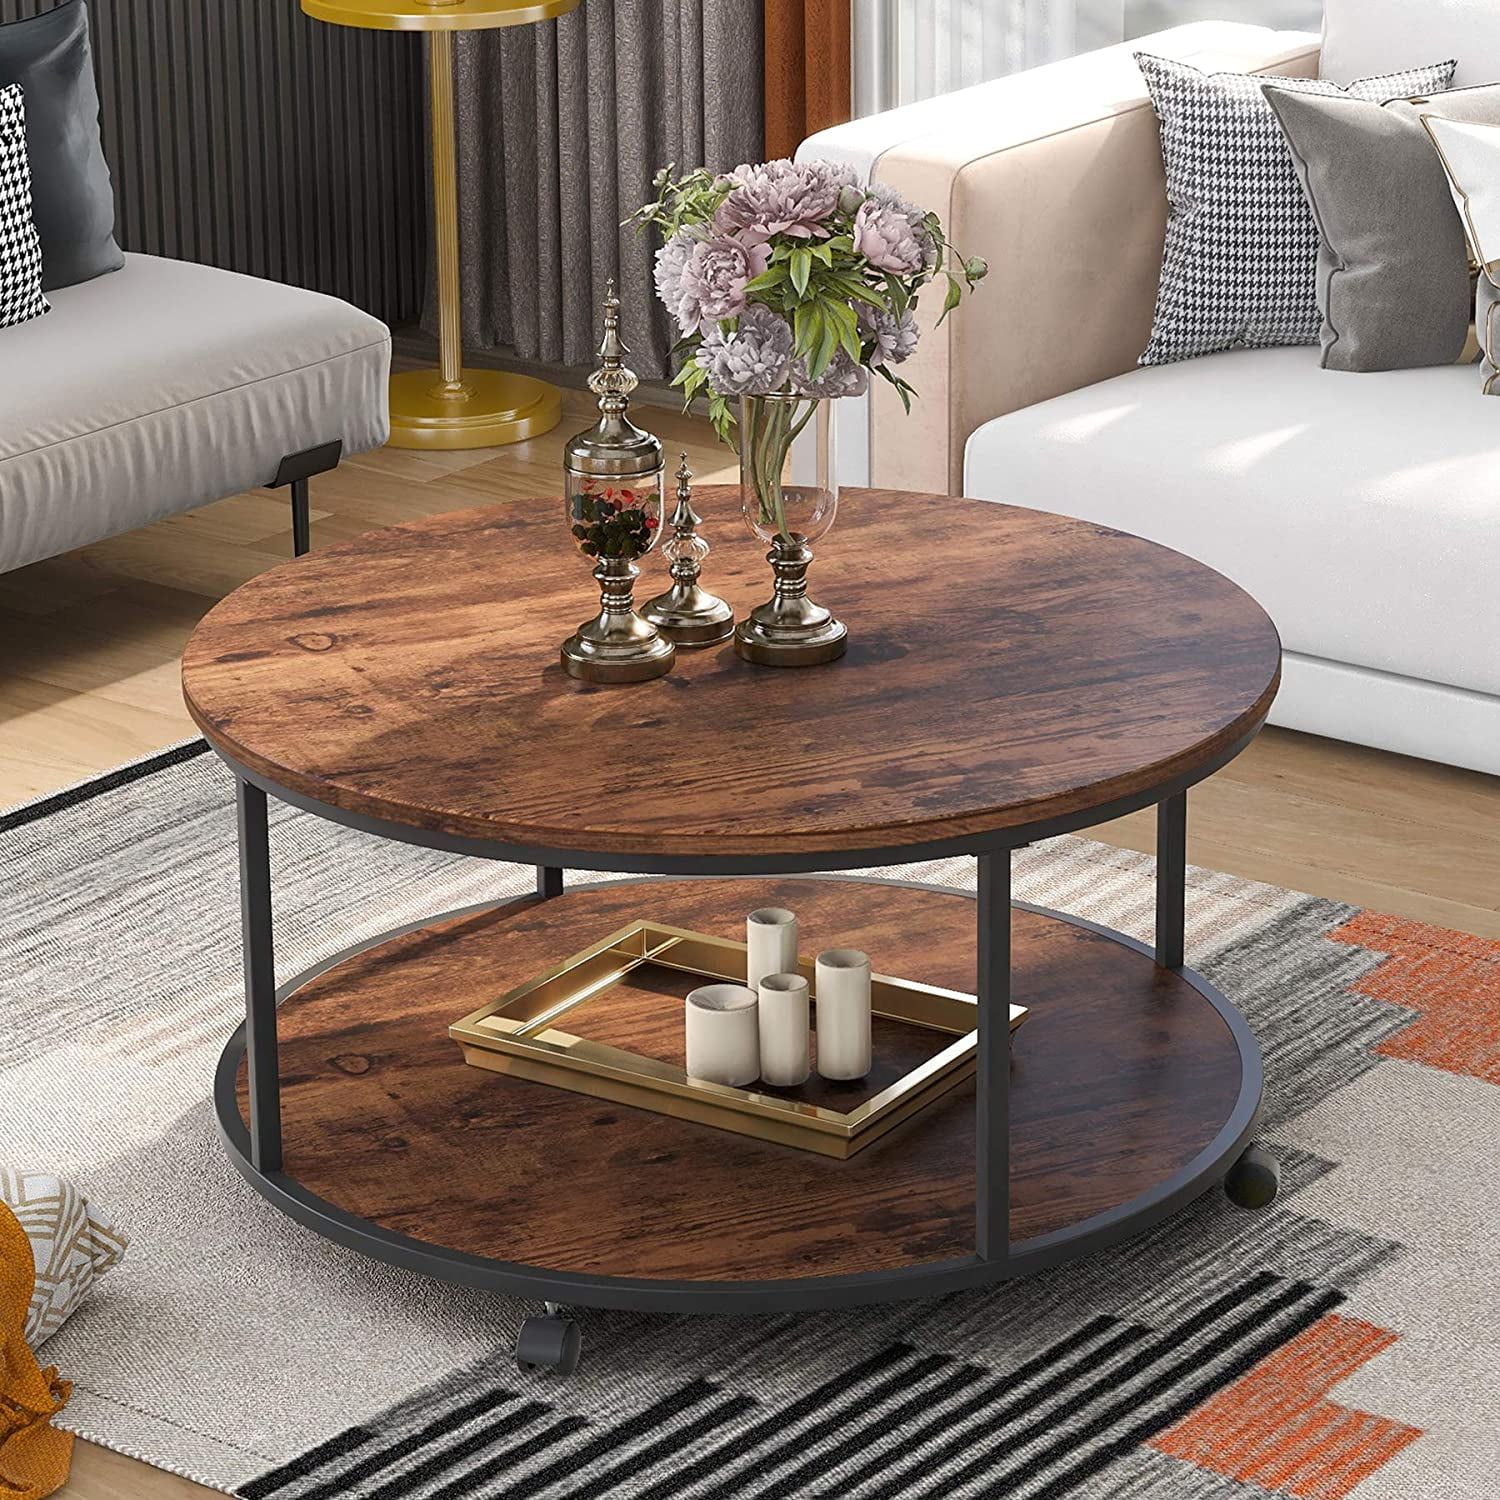 Wooden Coffee Table Designs For Living Room – Round Coffee Table Inside Brown Rustic Coffee Tables (Gallery 13 of 20)